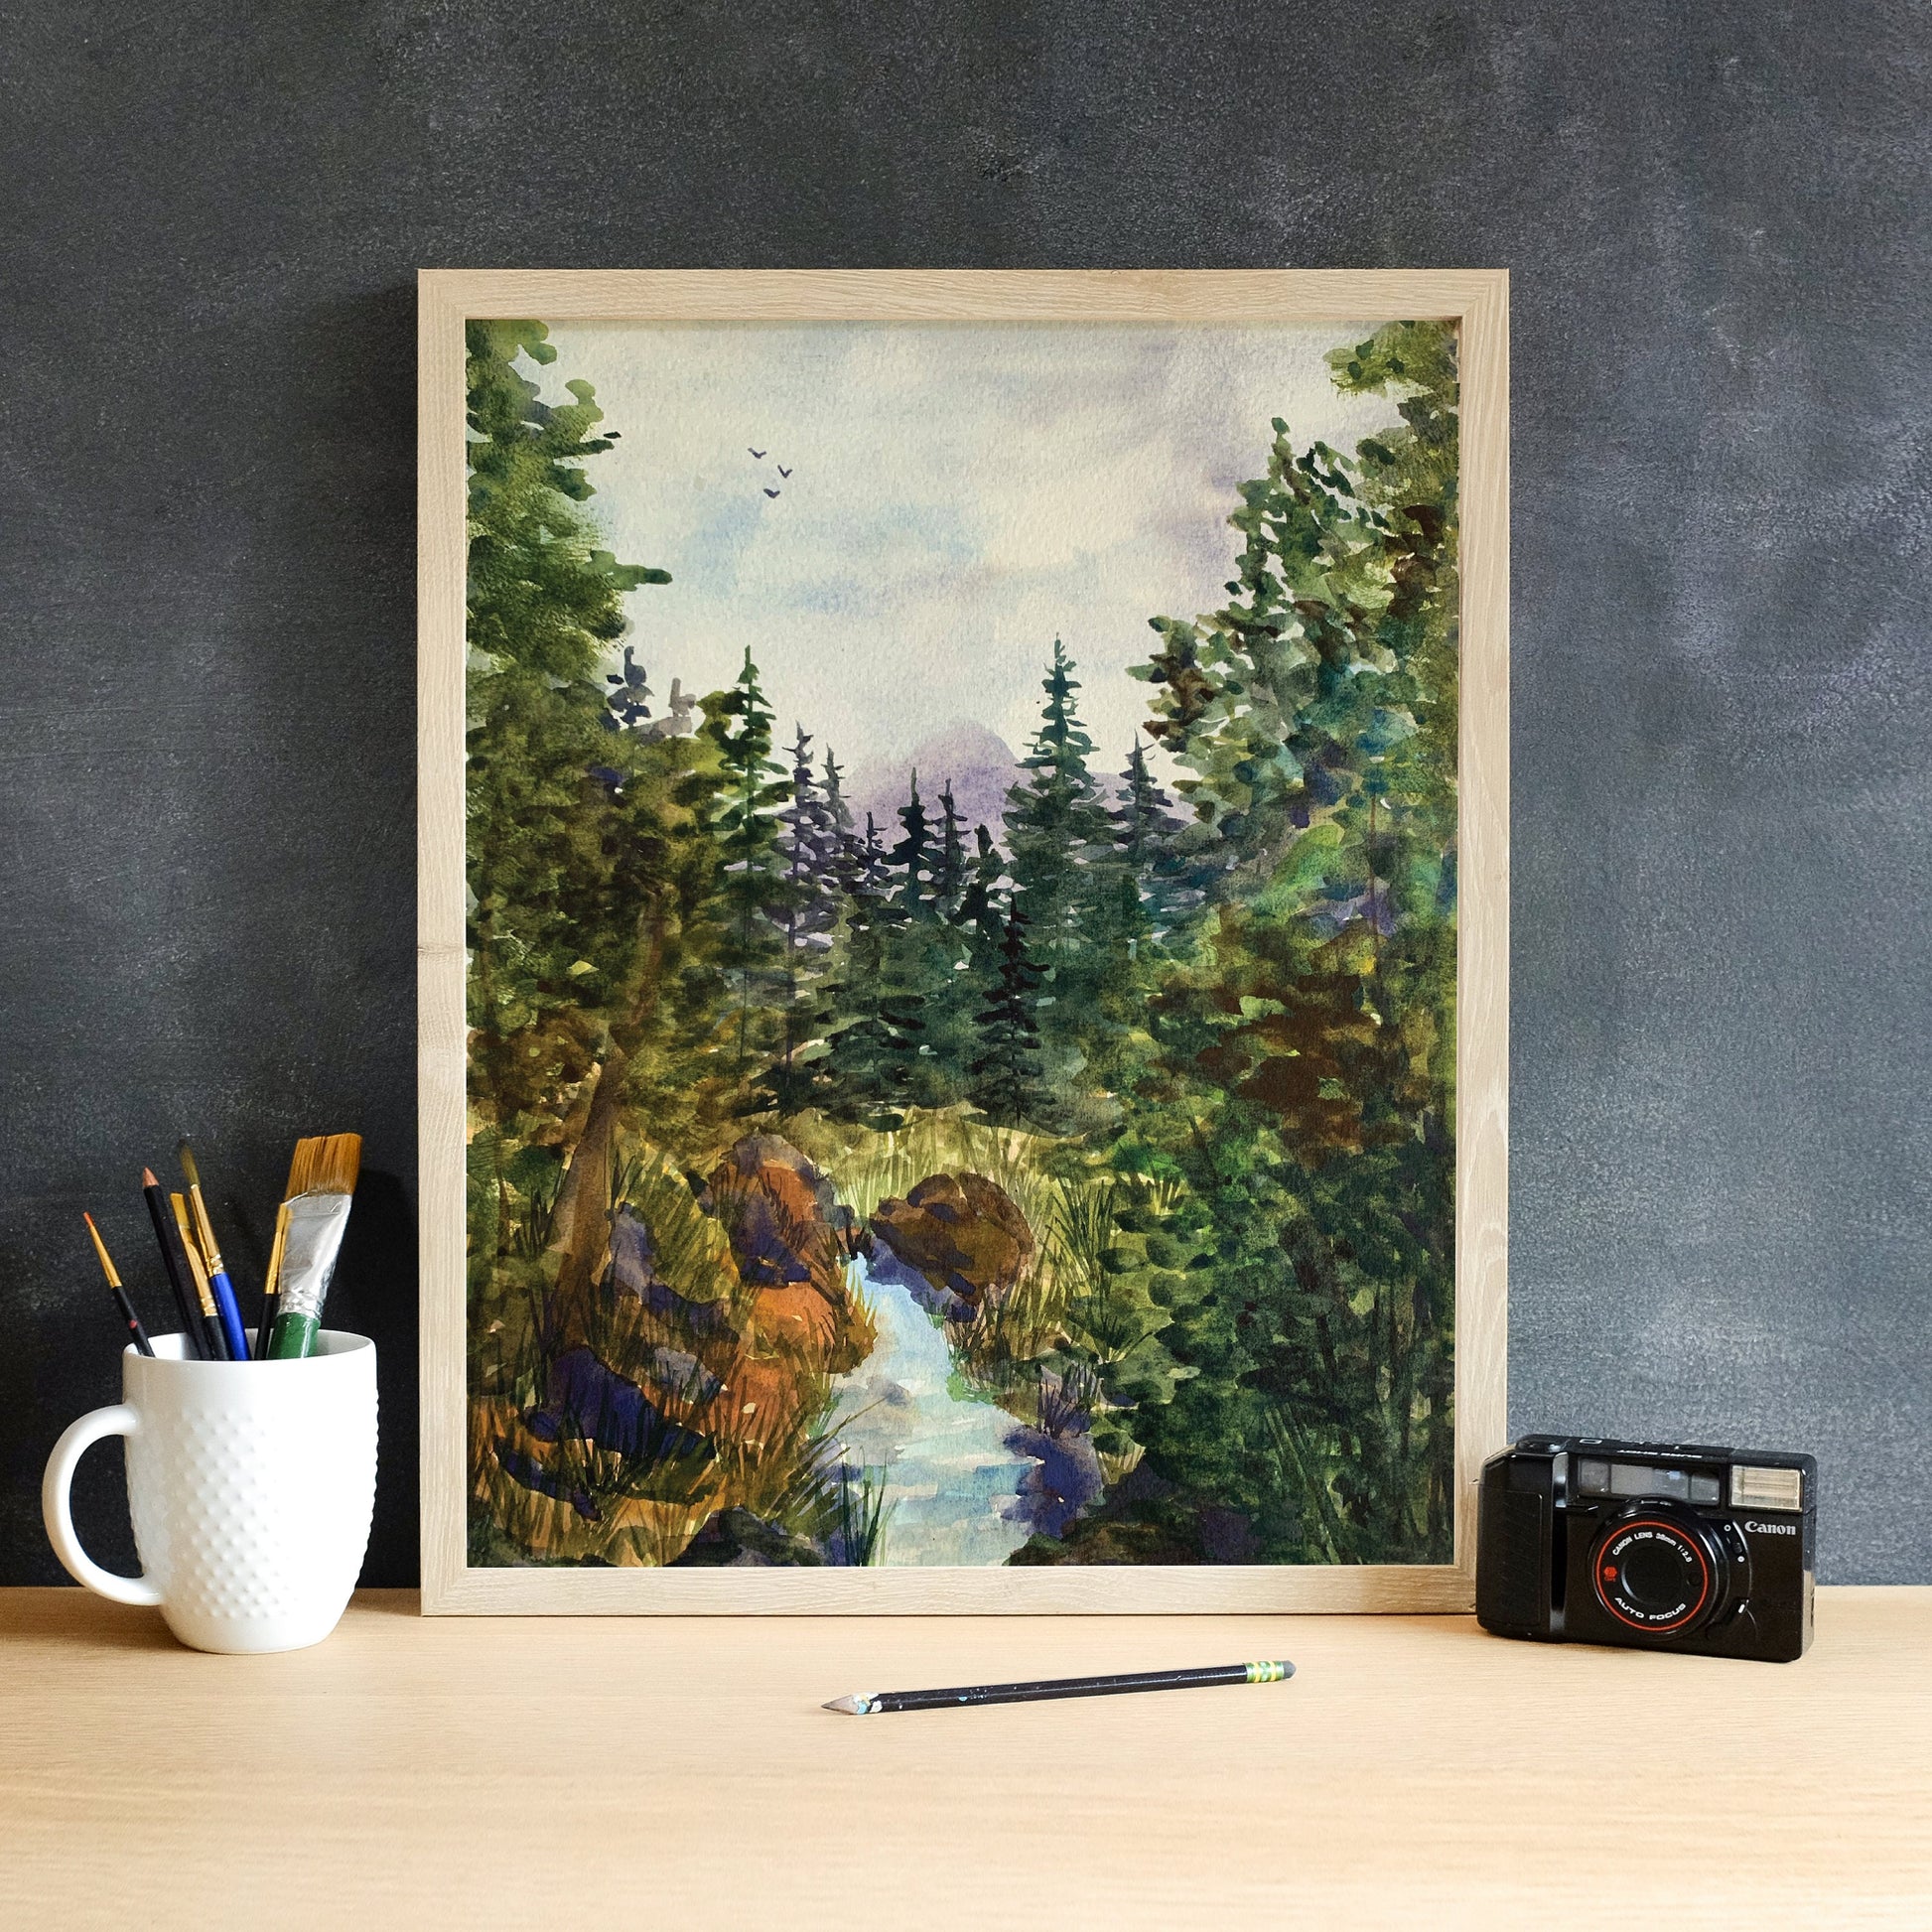 Forest Landscape with Distant Mountains - Watercolor Reproduction, Fine Art Print, Giclee Print, Original Watercolor Artwork